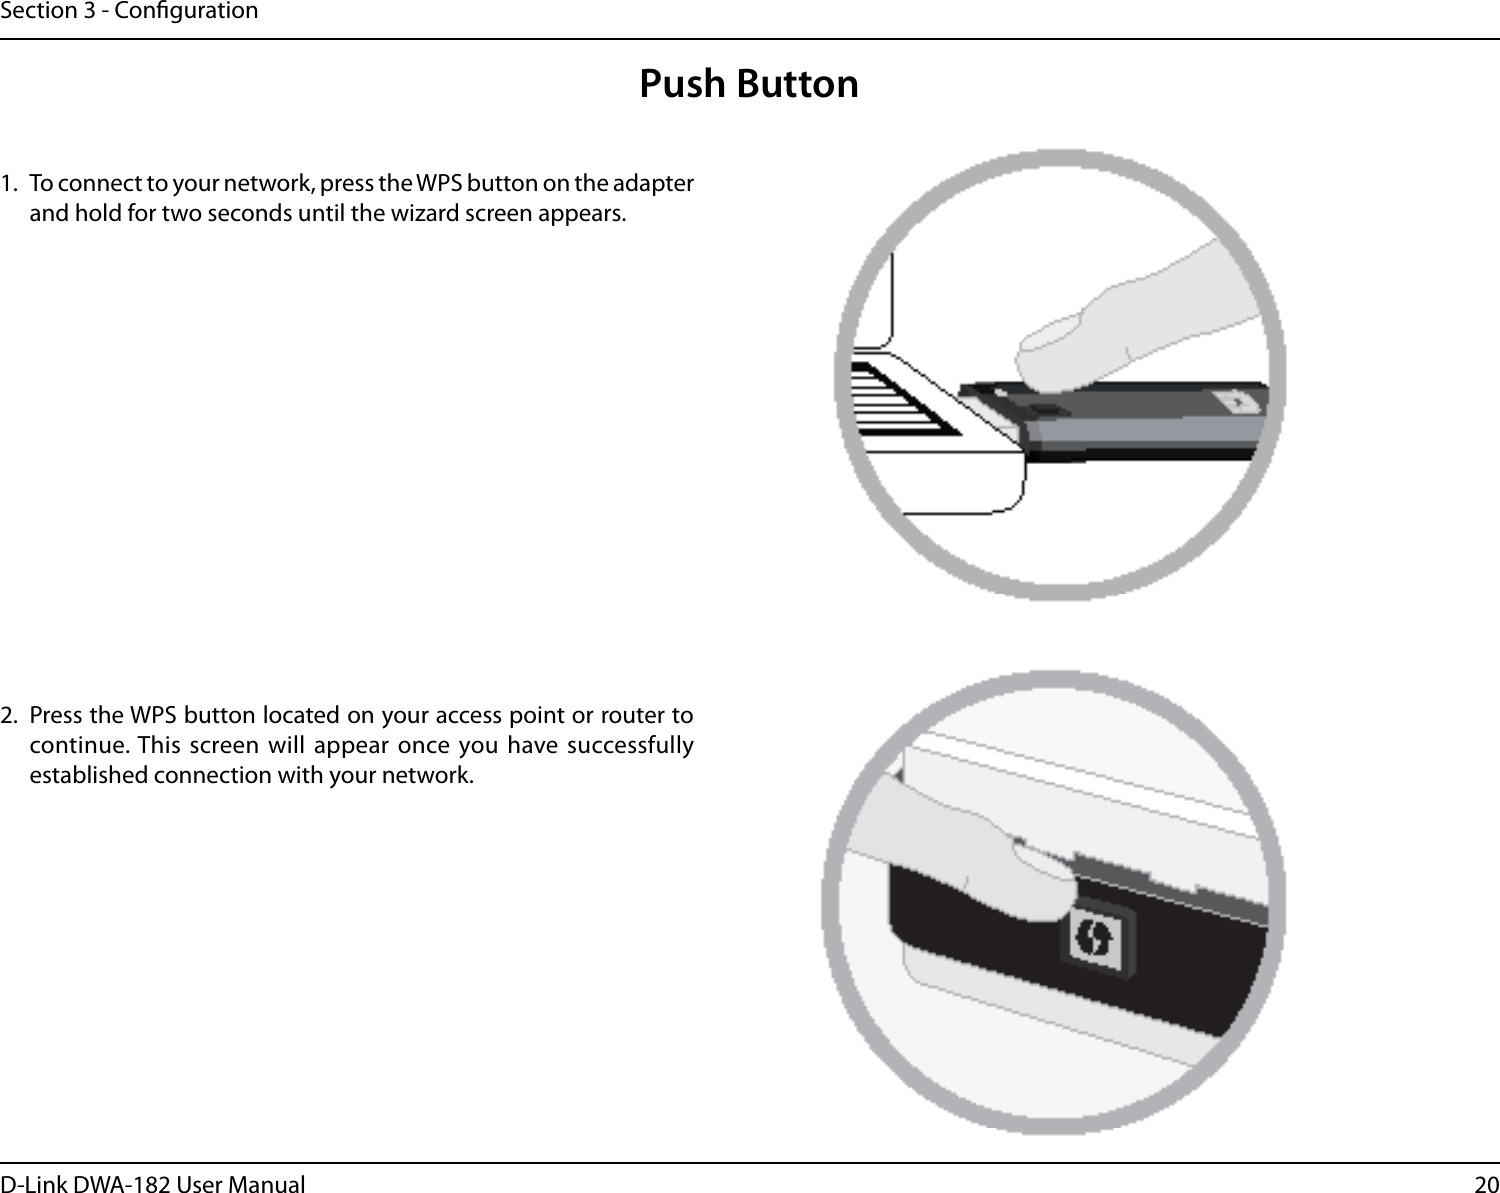 20D-Link DWA-182 User ManualSection 3 - CongurationPush Button1.  To connect to your network, press the WPS button on the adapter and hold for two seconds until the wizard screen appears.2.  Press the WPS button located on your access point or router to continue. This screen will appear once you have successfully established connection with your network. 